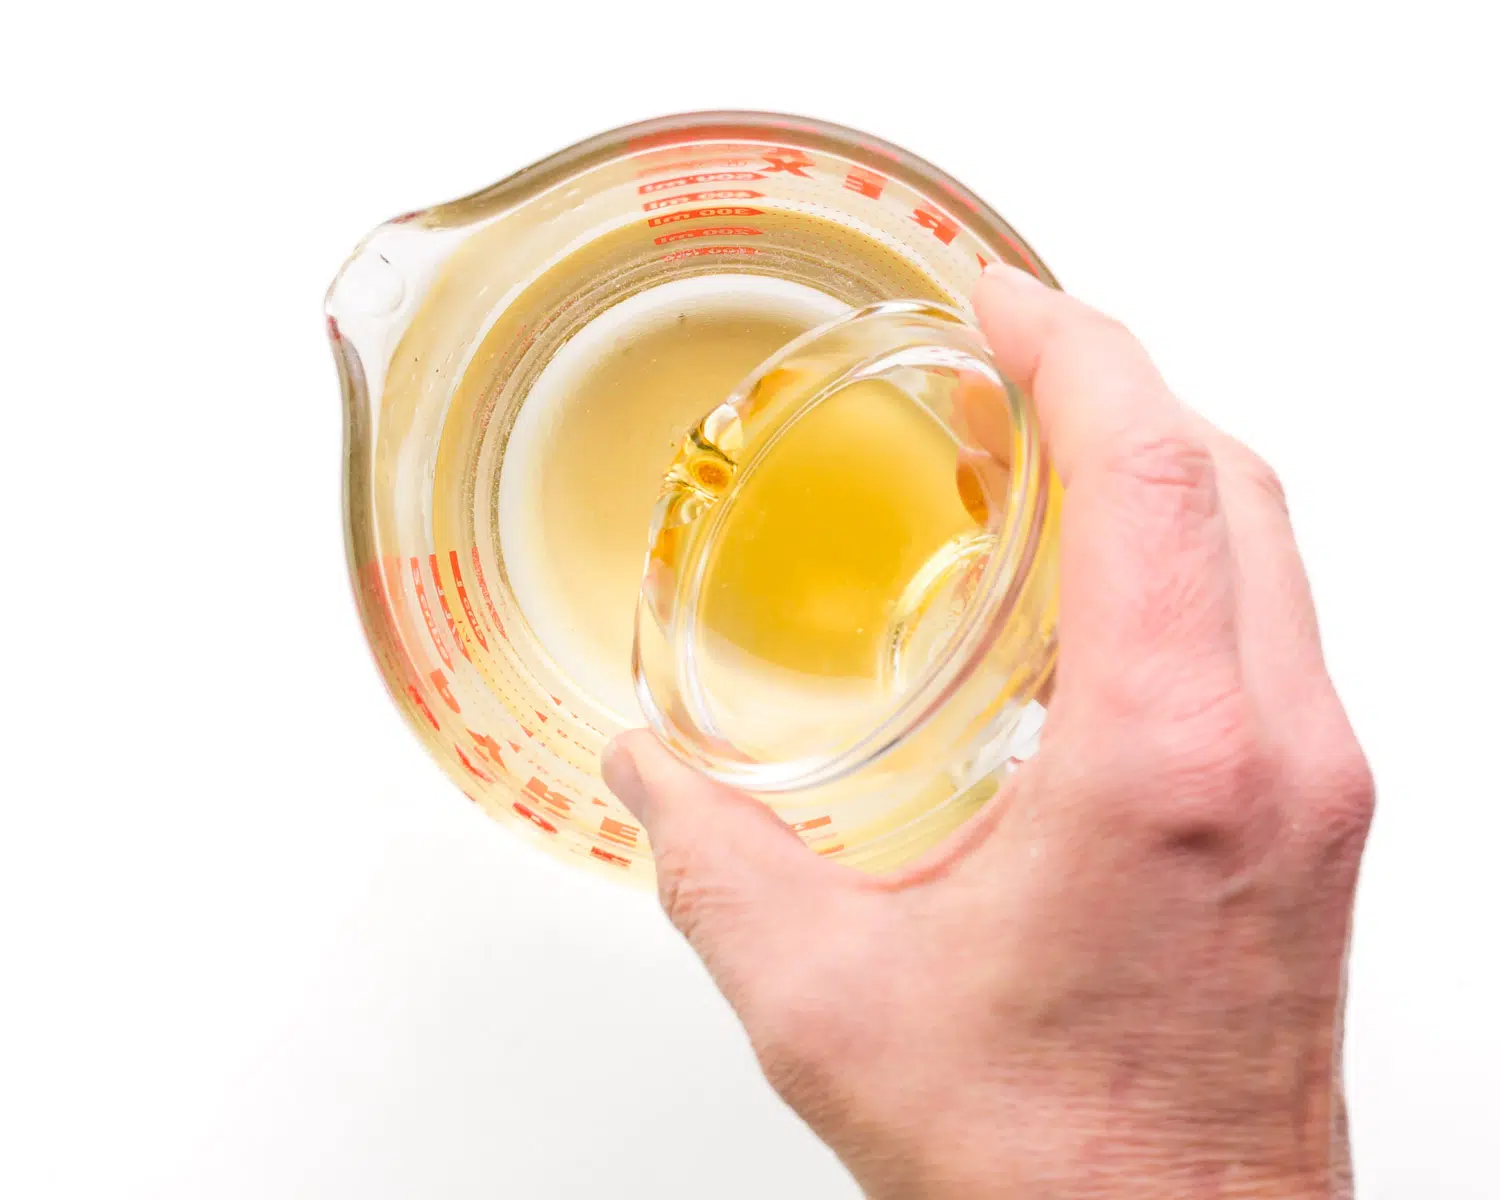 A hand holds a small bowl of maple syrup, pouring it into a glass measuring cup with water.